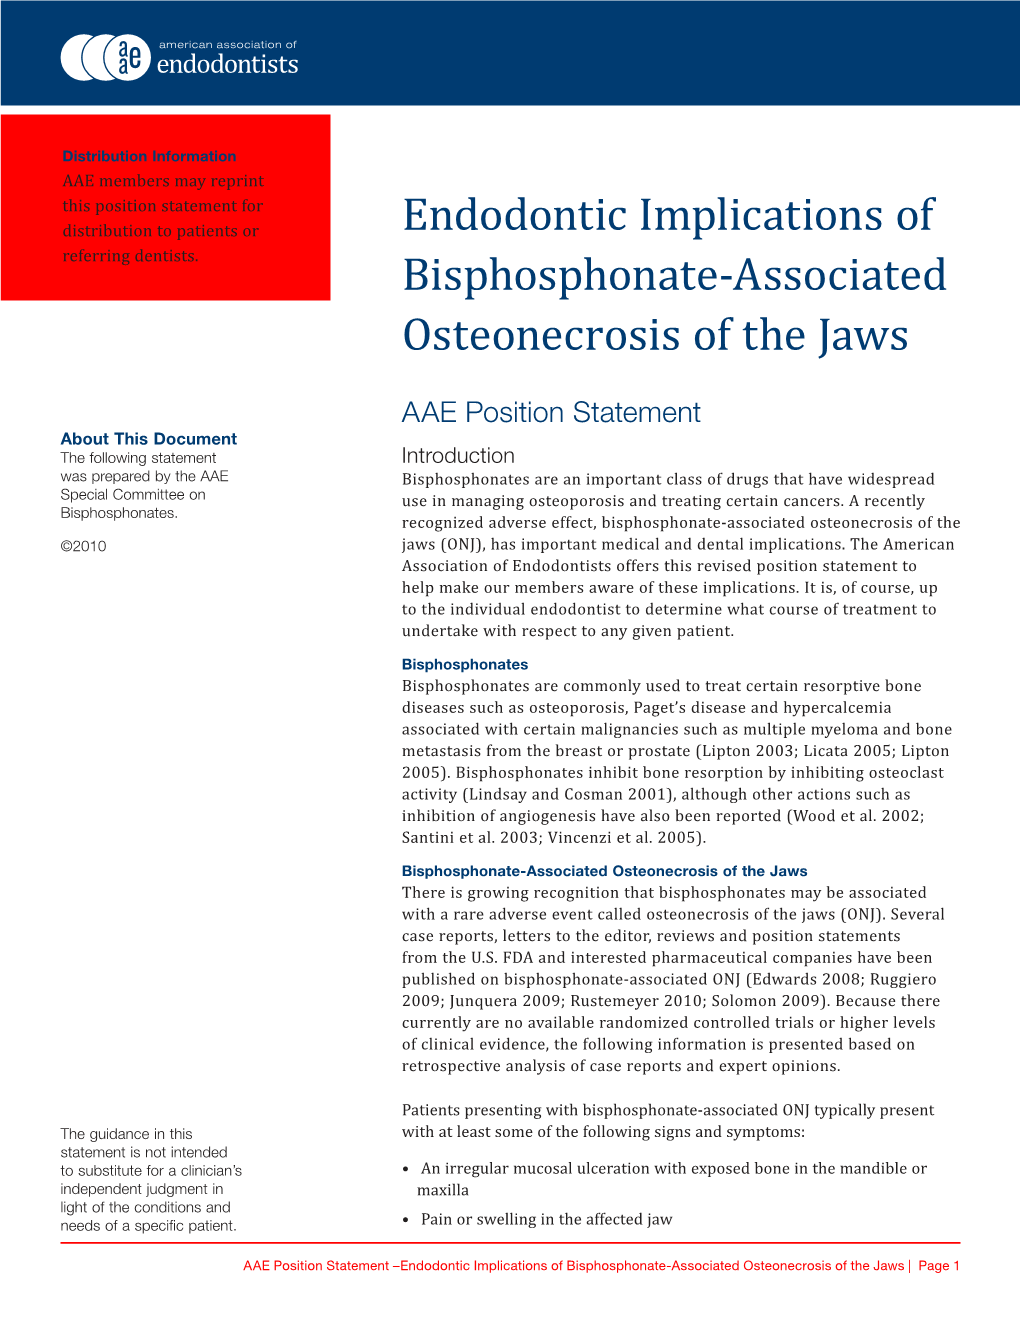 AAE Position Statement, Endodontic Implications of Bisphosphonate-Associated Osteonecrosis of The